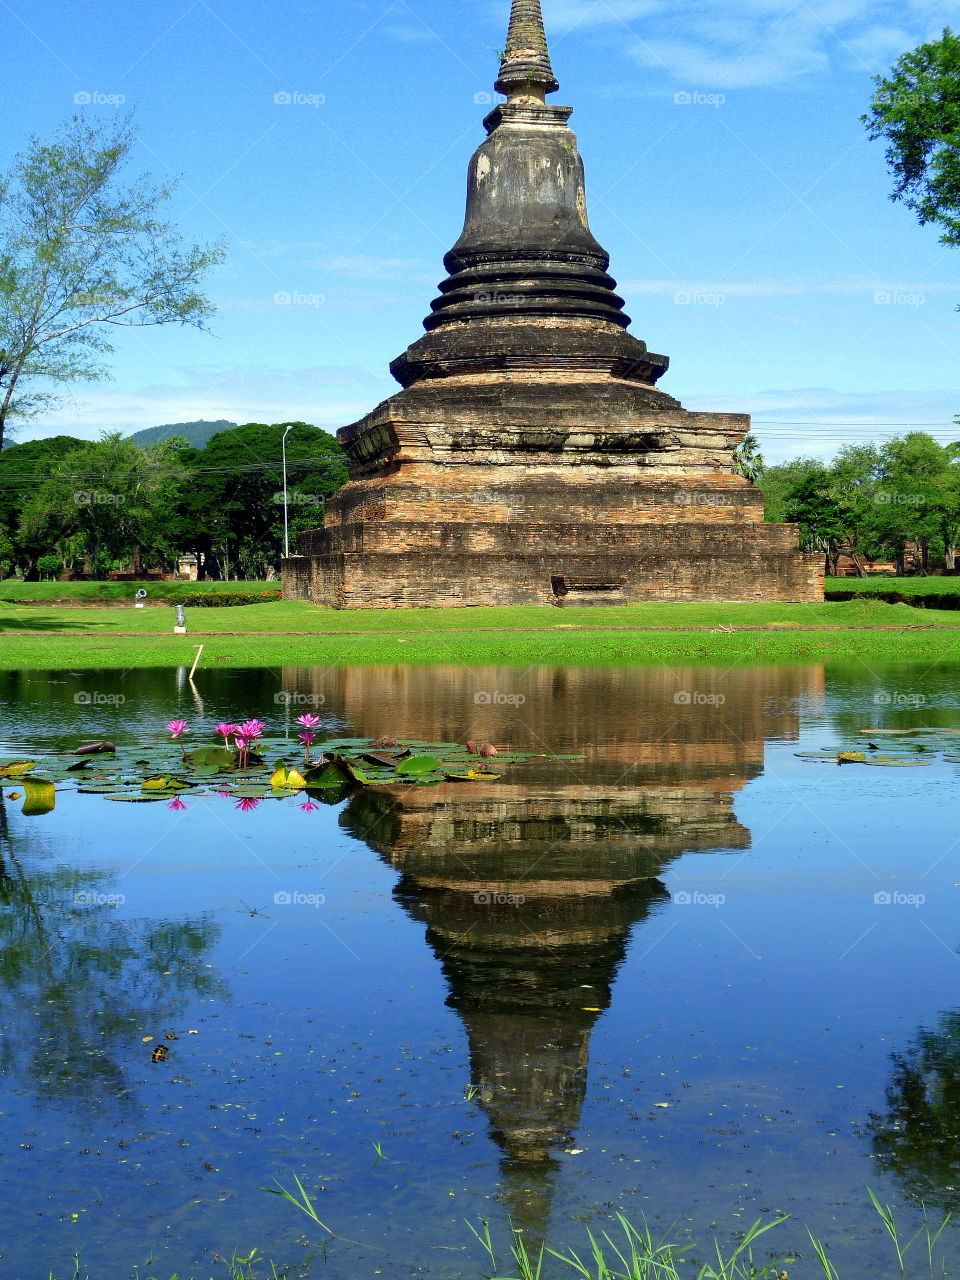 laotiano temple and reflection into the water with flowers